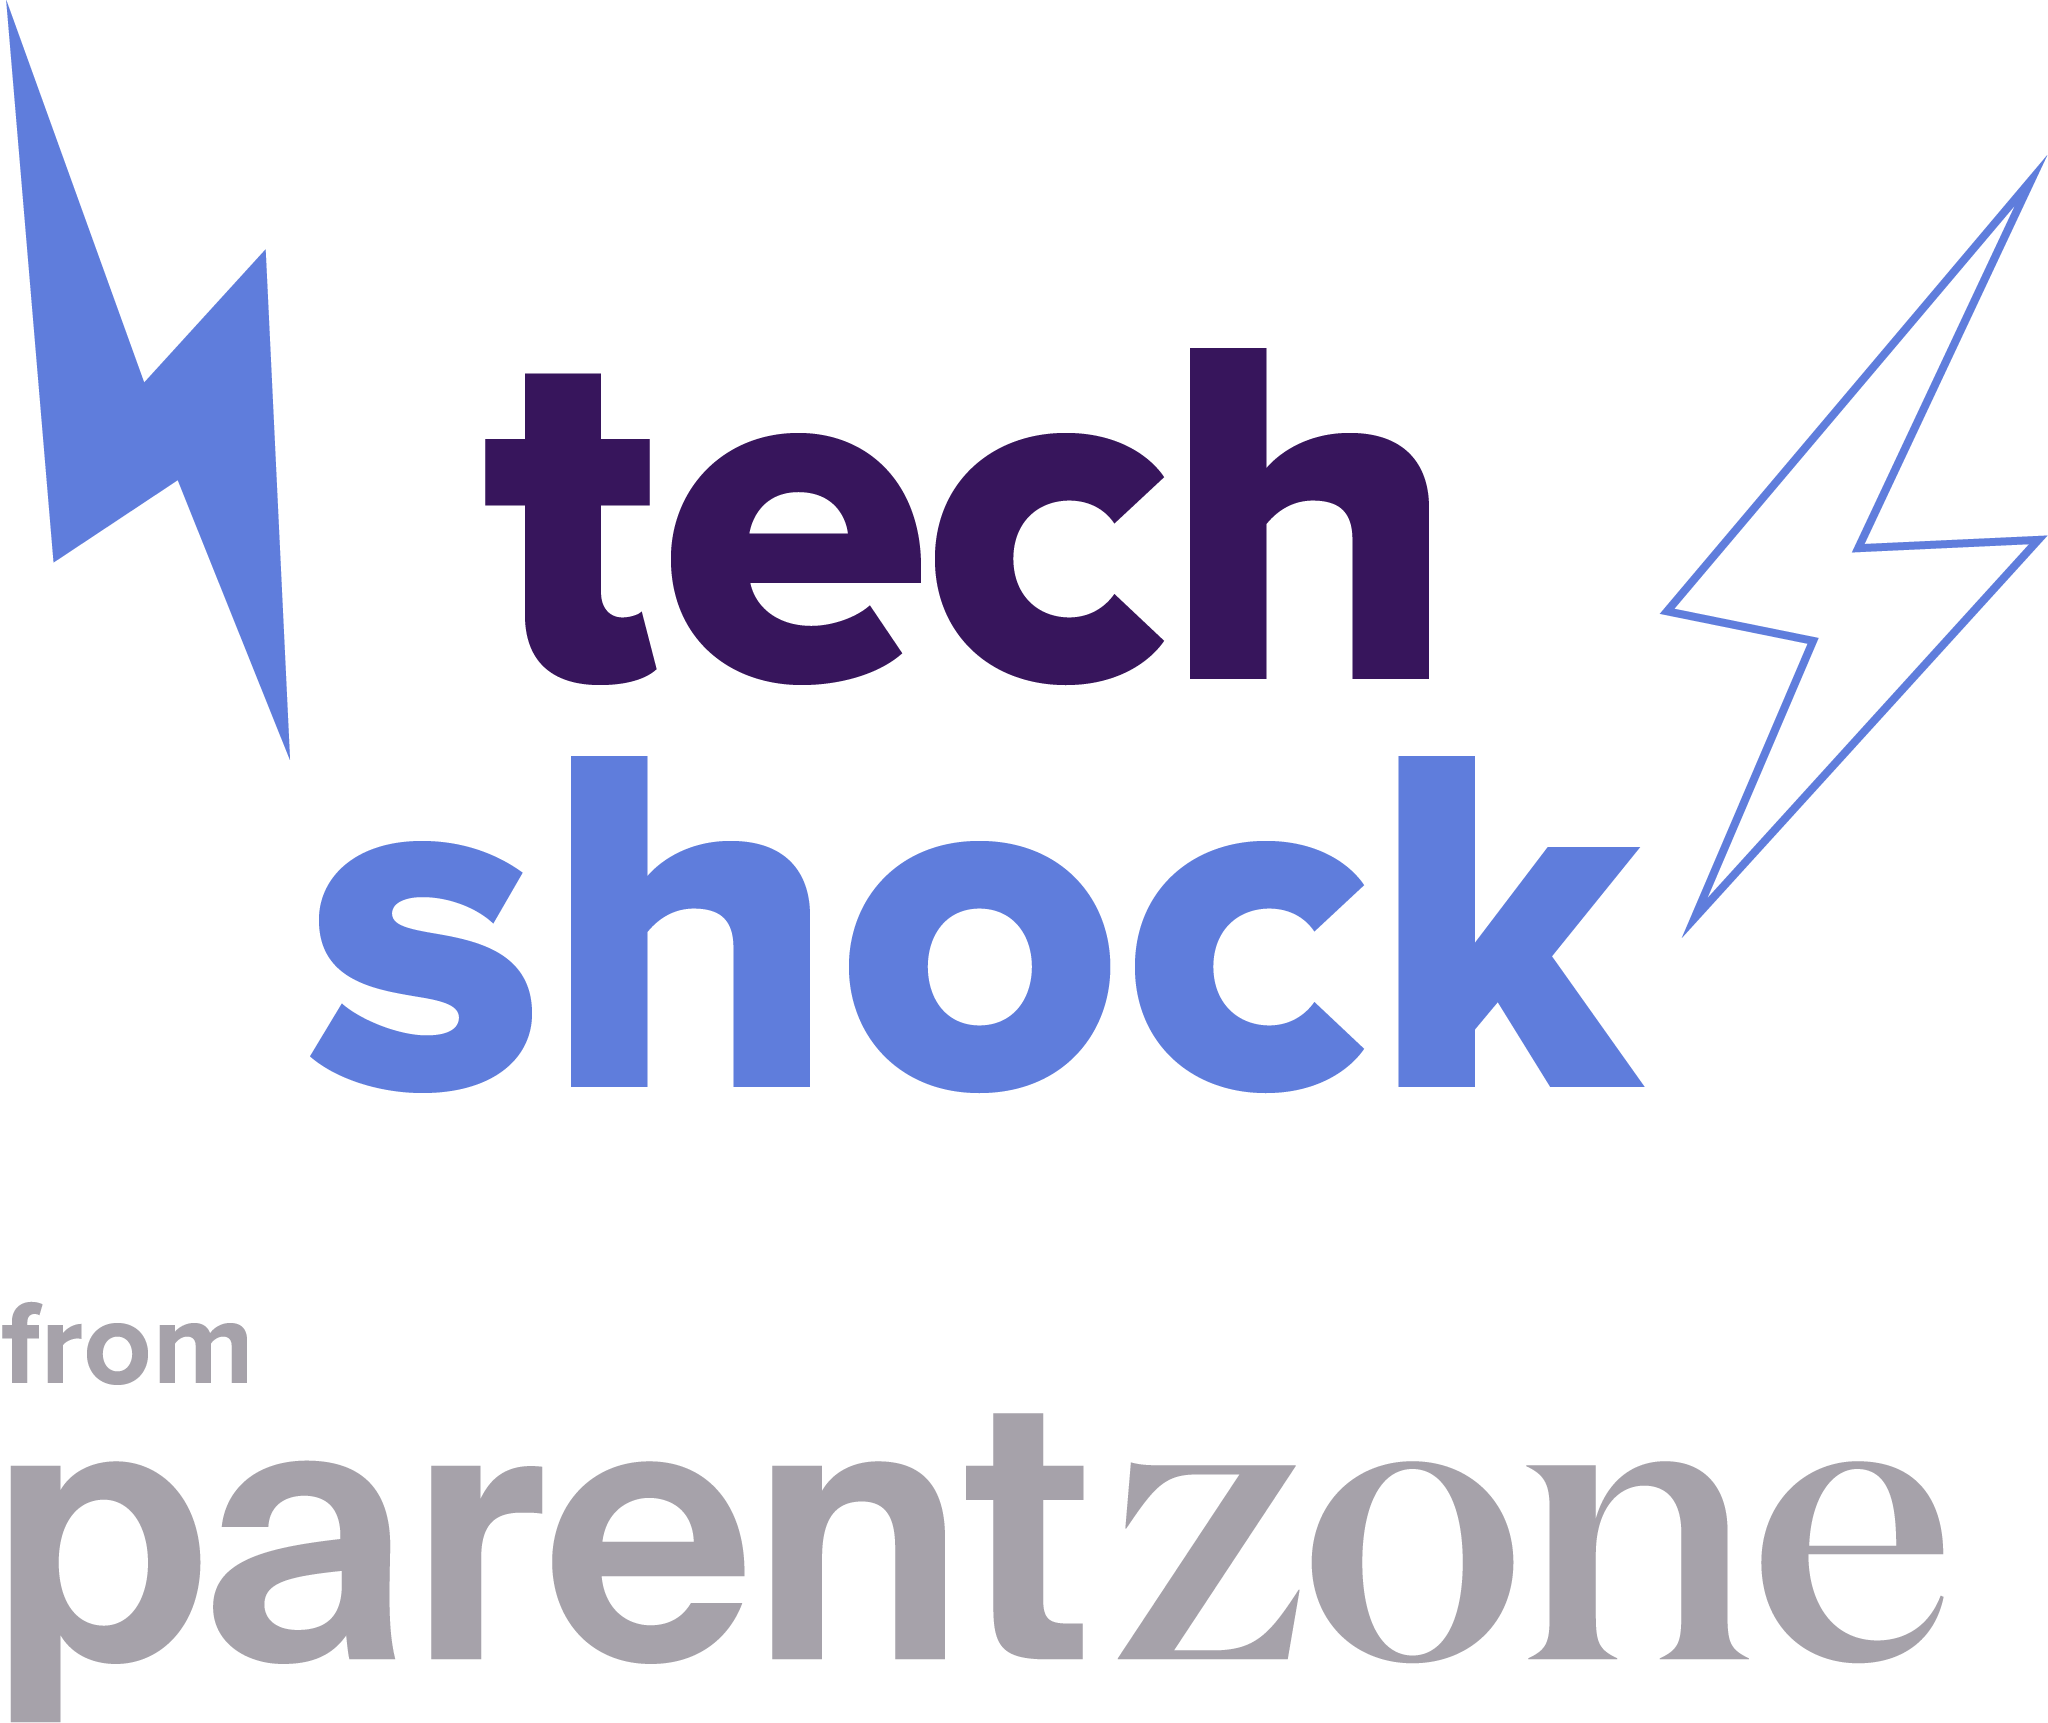 Tech Shock Podcast from Parent Zone